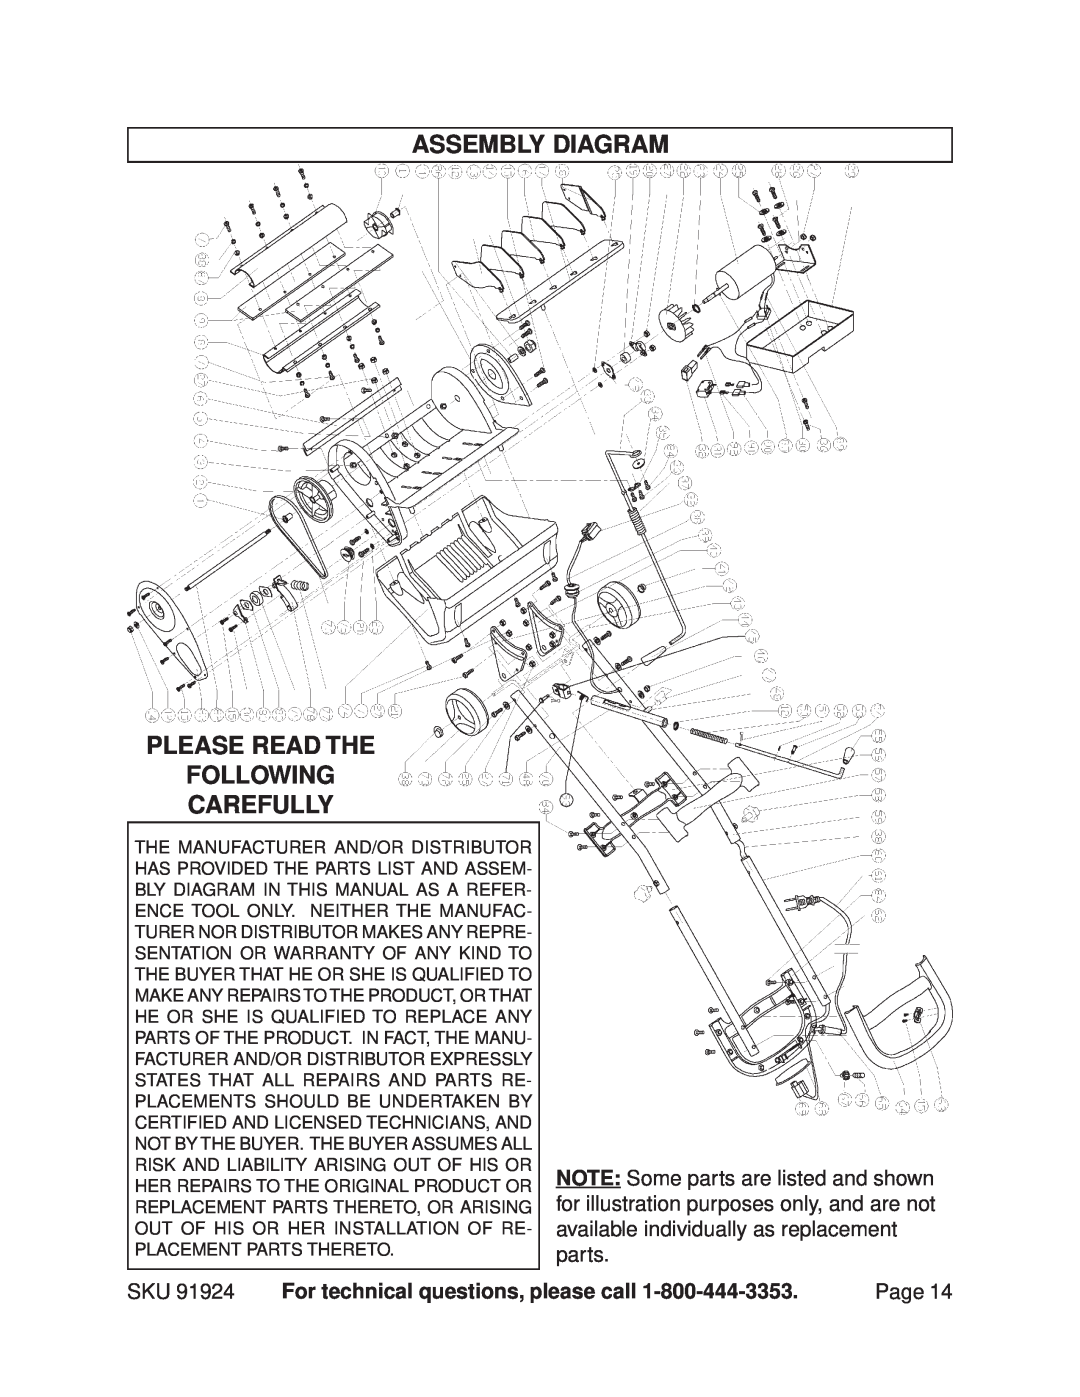 Harbor Freight Tools 91924 Assembly Diagram Please Read The Following Carefully, For technical questions, please call 